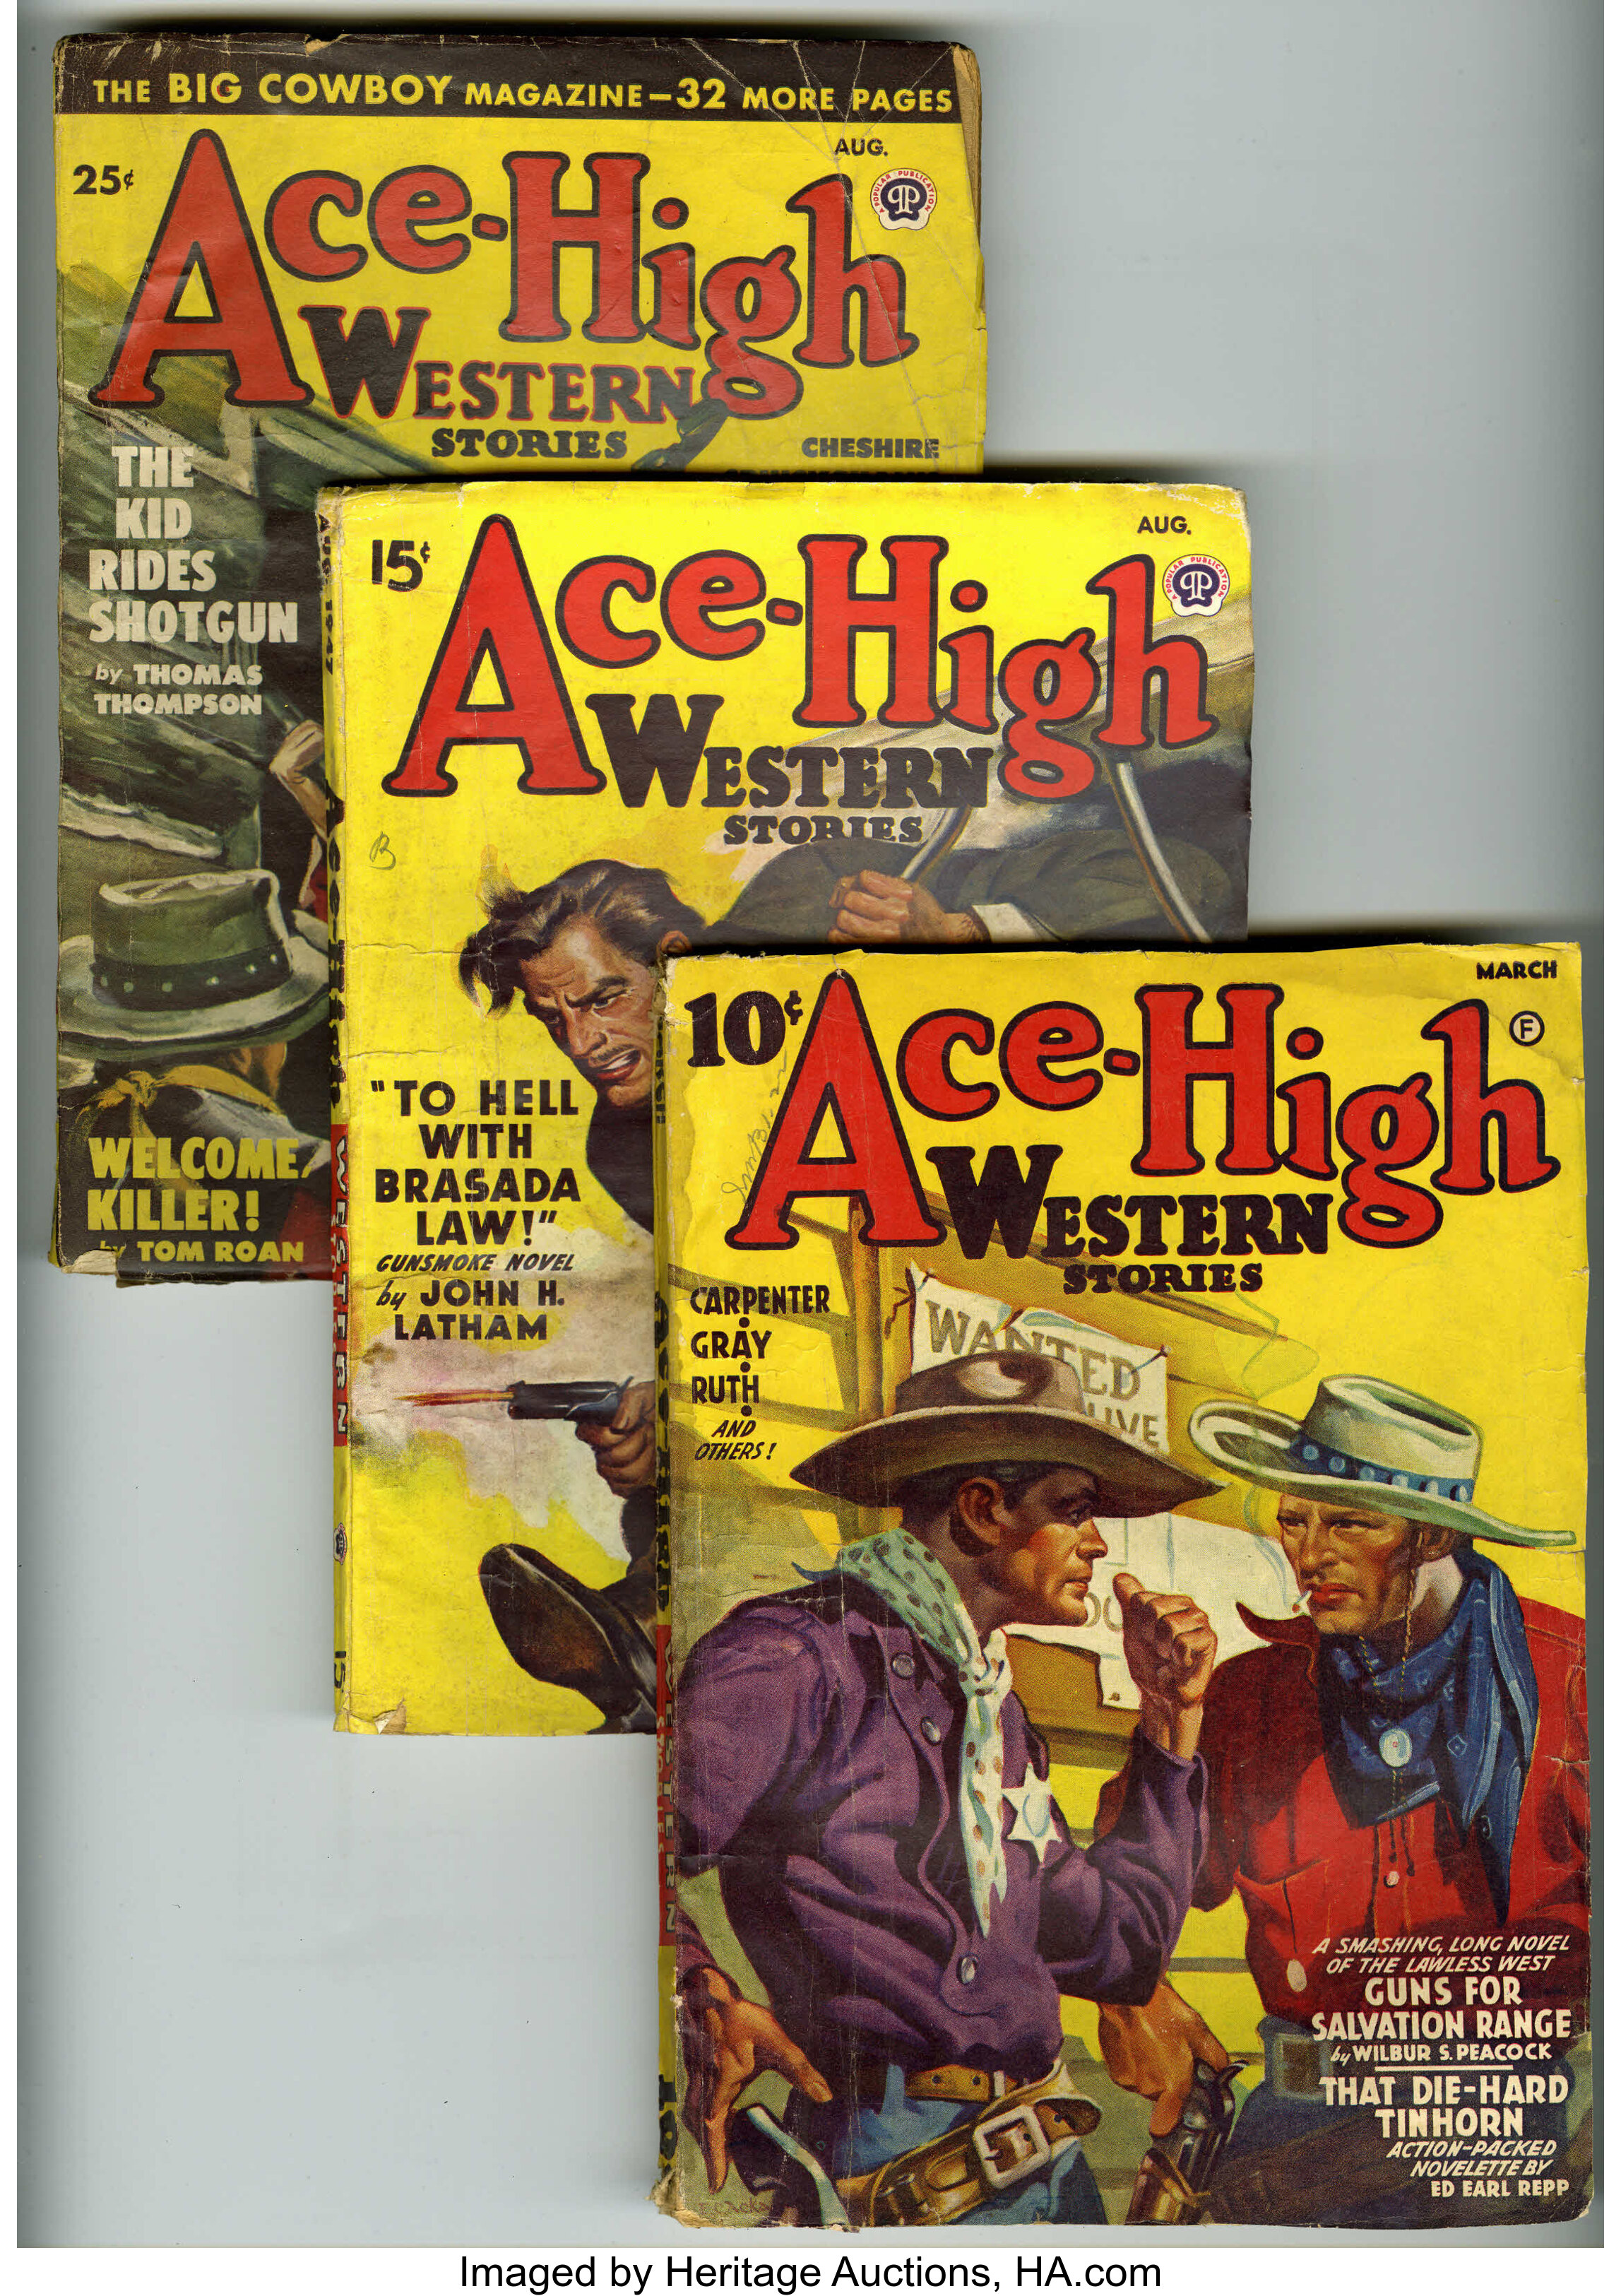 Sold at Auction: COLLECTION OF LOUIS L'AMOUR PULP WESTERN BOOKS